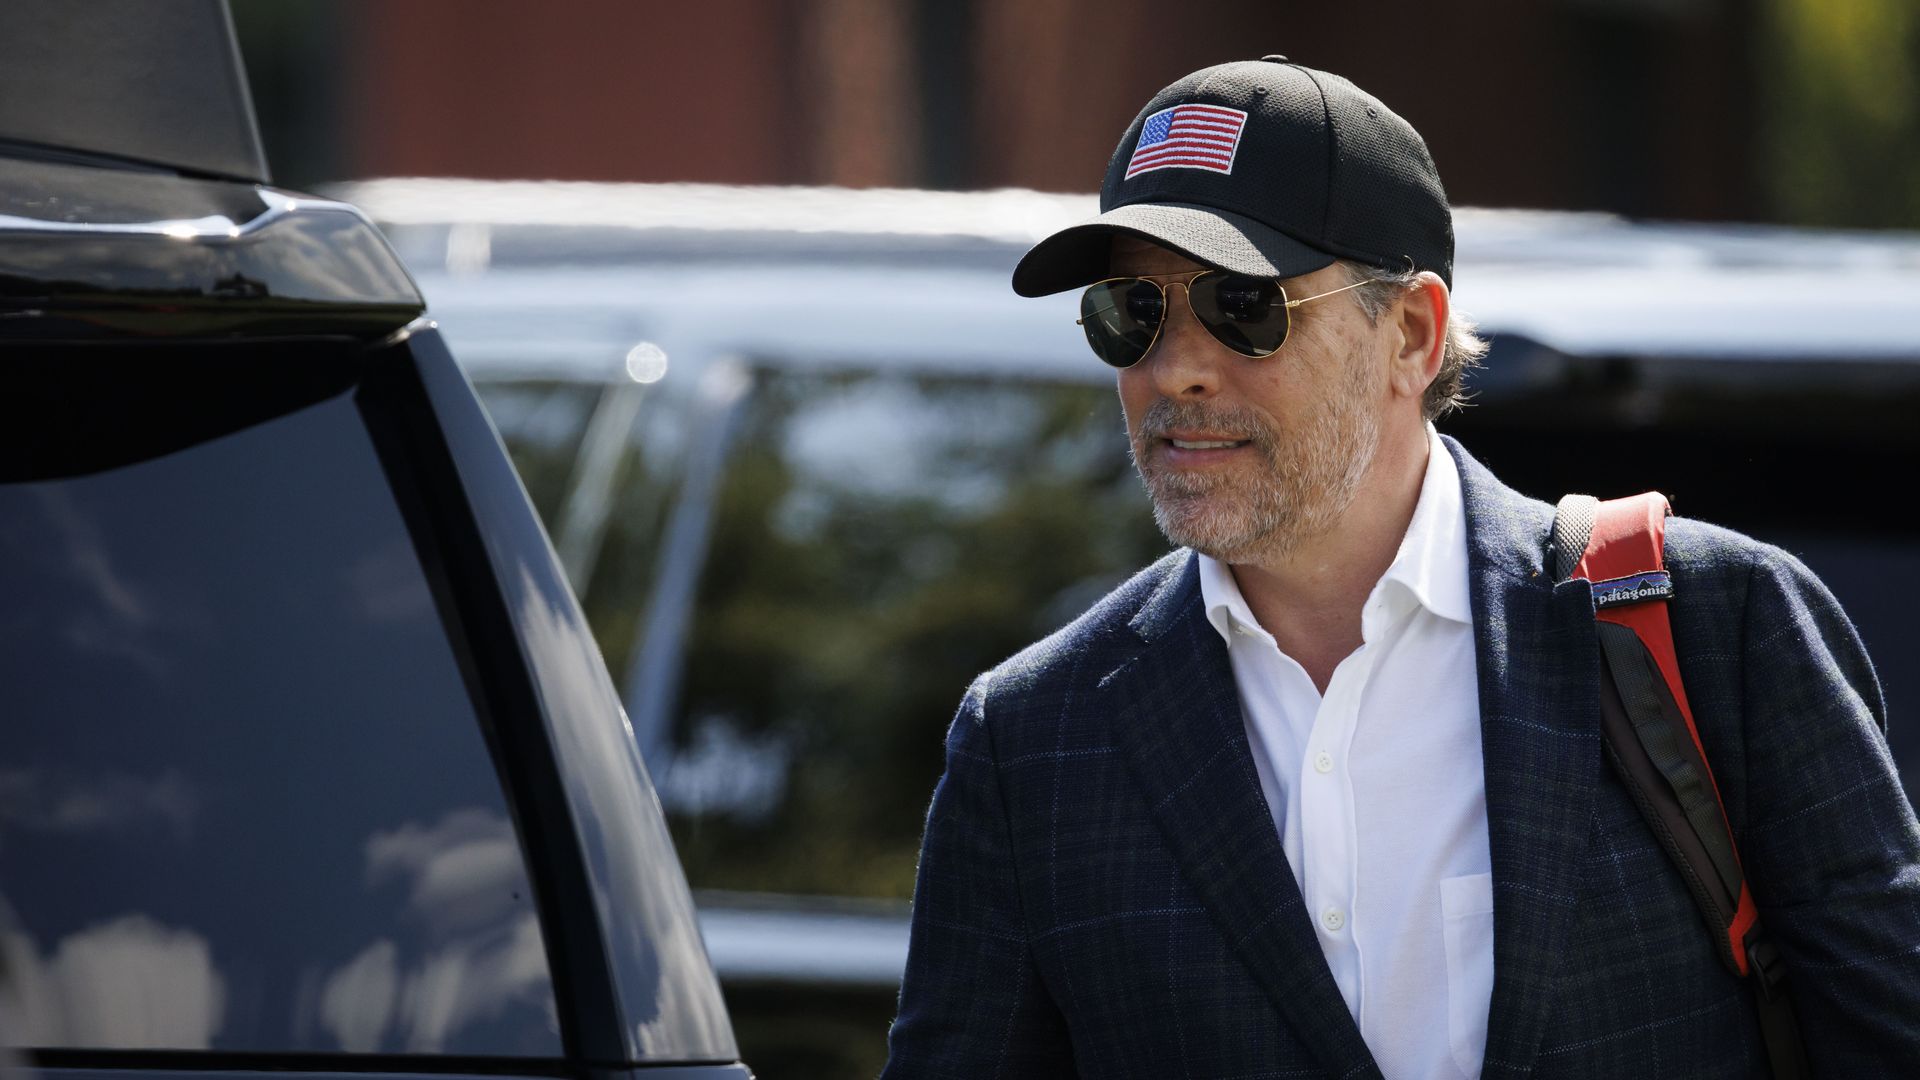 Hunter Biden wearing a cap with an American flag on it.